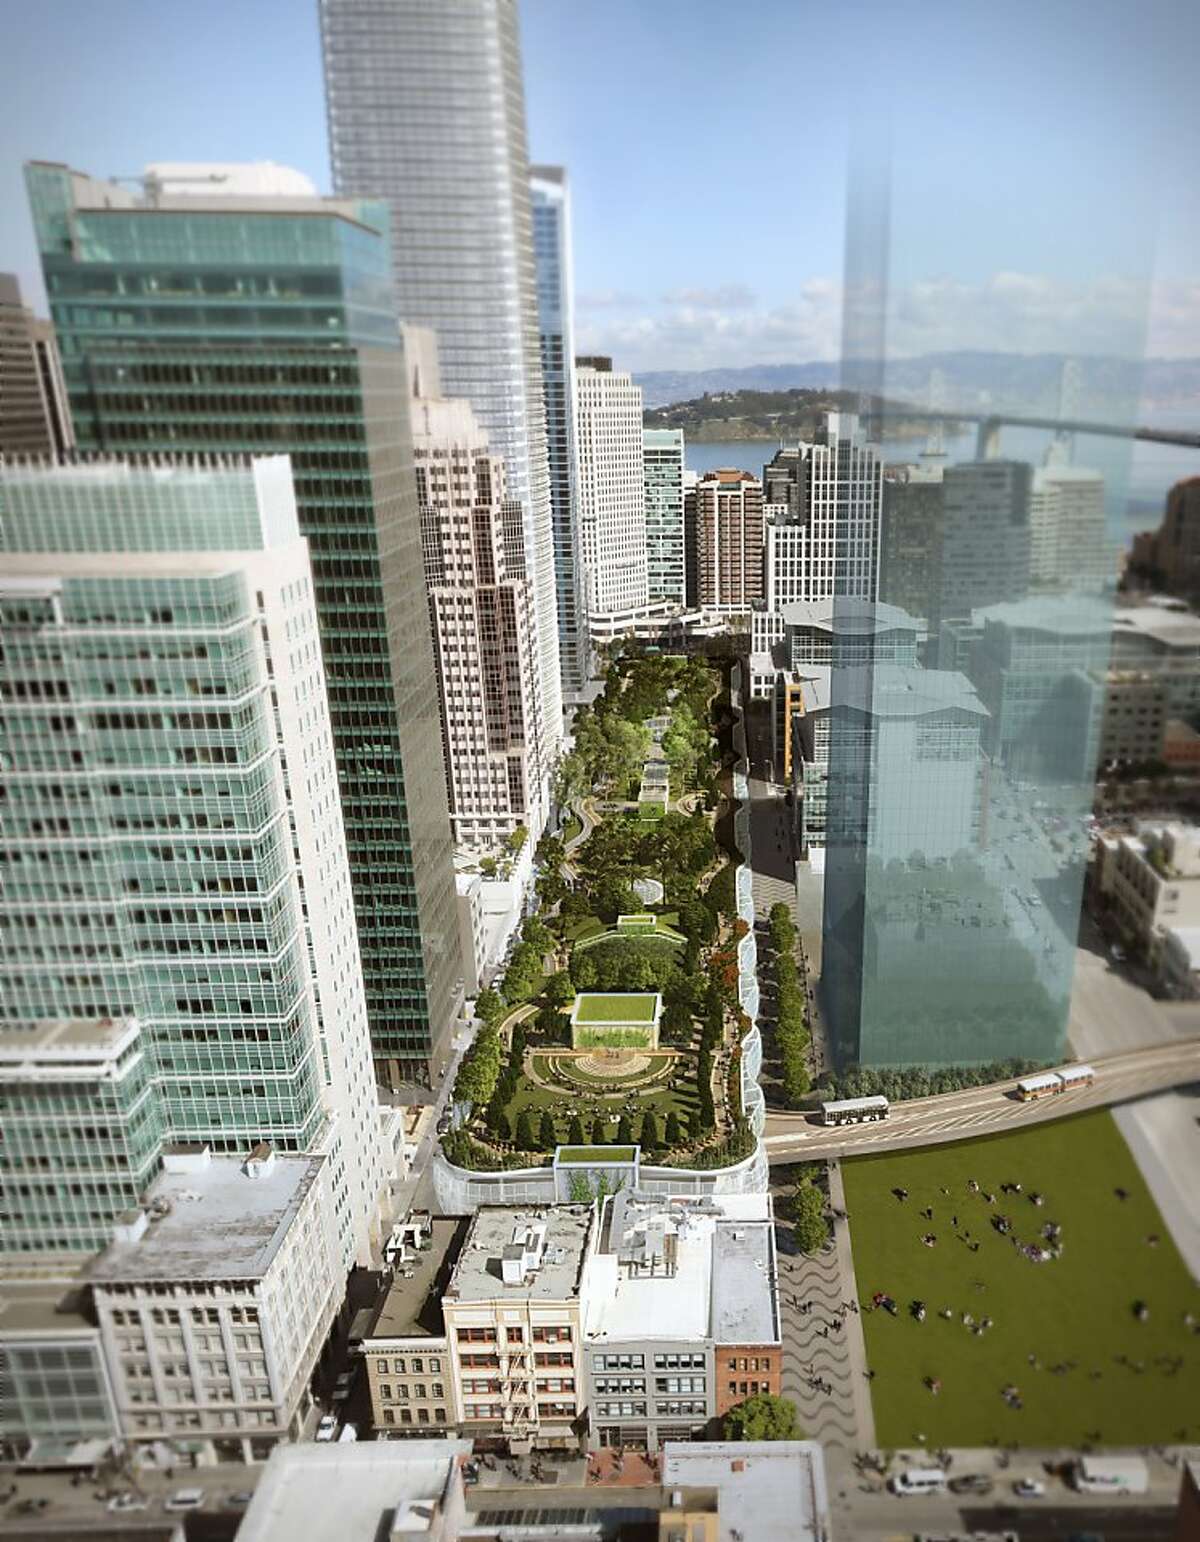 The Transbay Transit Center intended to replace the Transbay Terminal would be topped by this 5.4 acre park, designed by PWP Landscape Architecture and Pelli Clarke Pelli Architects. This is a rendering; the tallest tower on the left is the proposed Transbay tower, vertical ghost on the right is possible tower site. CREDIT: Project Architect: Pelli Clarke Pelli. Renderings courtesy of the Transbay Joint Powers Authority. Ran on: 04-22-2010 The current Transbay Terminal, left; in the new design, right, the tallest tower at left is the proposed Transbay Tower, and the ghost at right is an alternate site. Ran on: 04-22-2010 At left is the current Transbay Terminal. In the new design, right, the tallest tower on the left is the proposed Transbay Tower; the ghost at right is an alternate site.